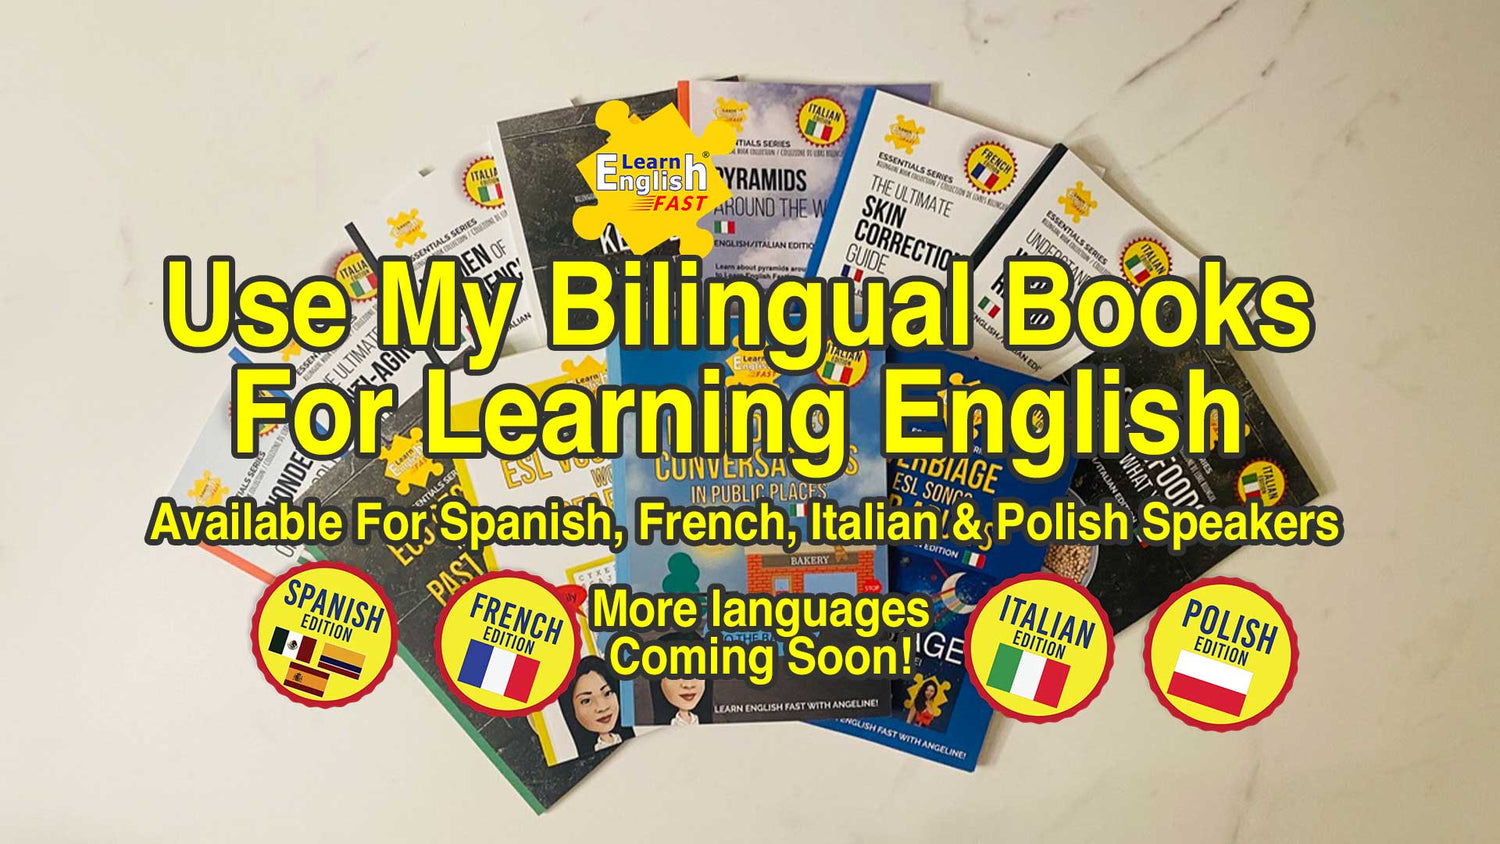 The Learn English Fast Book Series